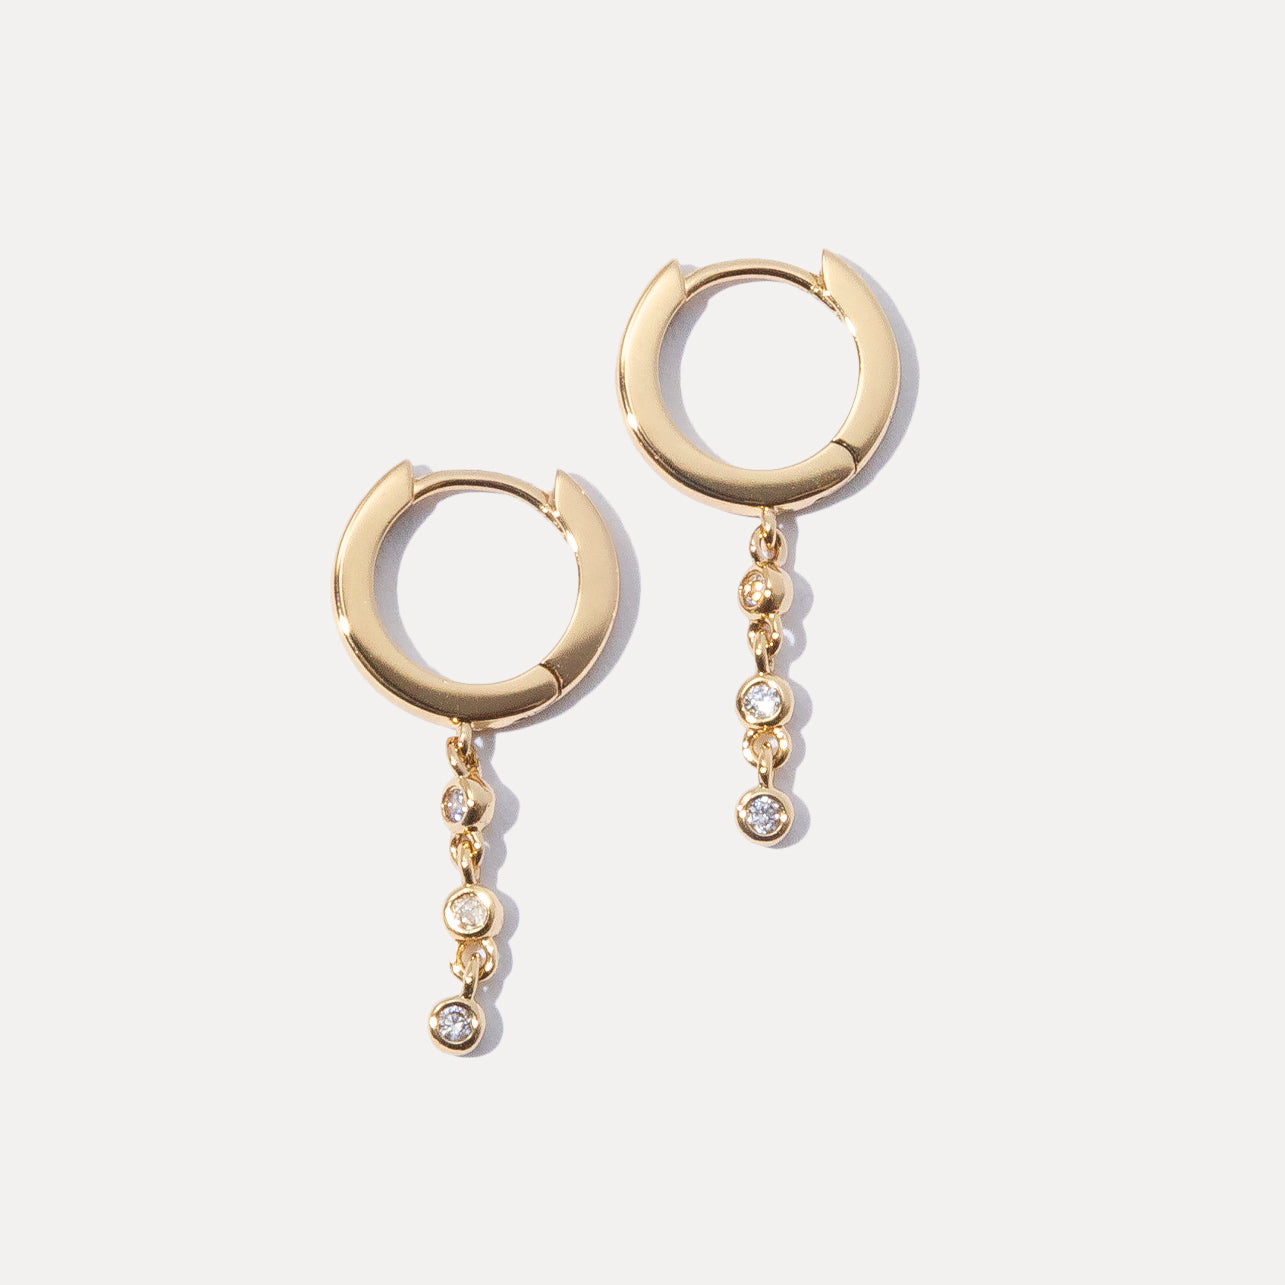 From Hoops to Studs: Exploring Versatile Gold Earring Styles Every Woman Should Own